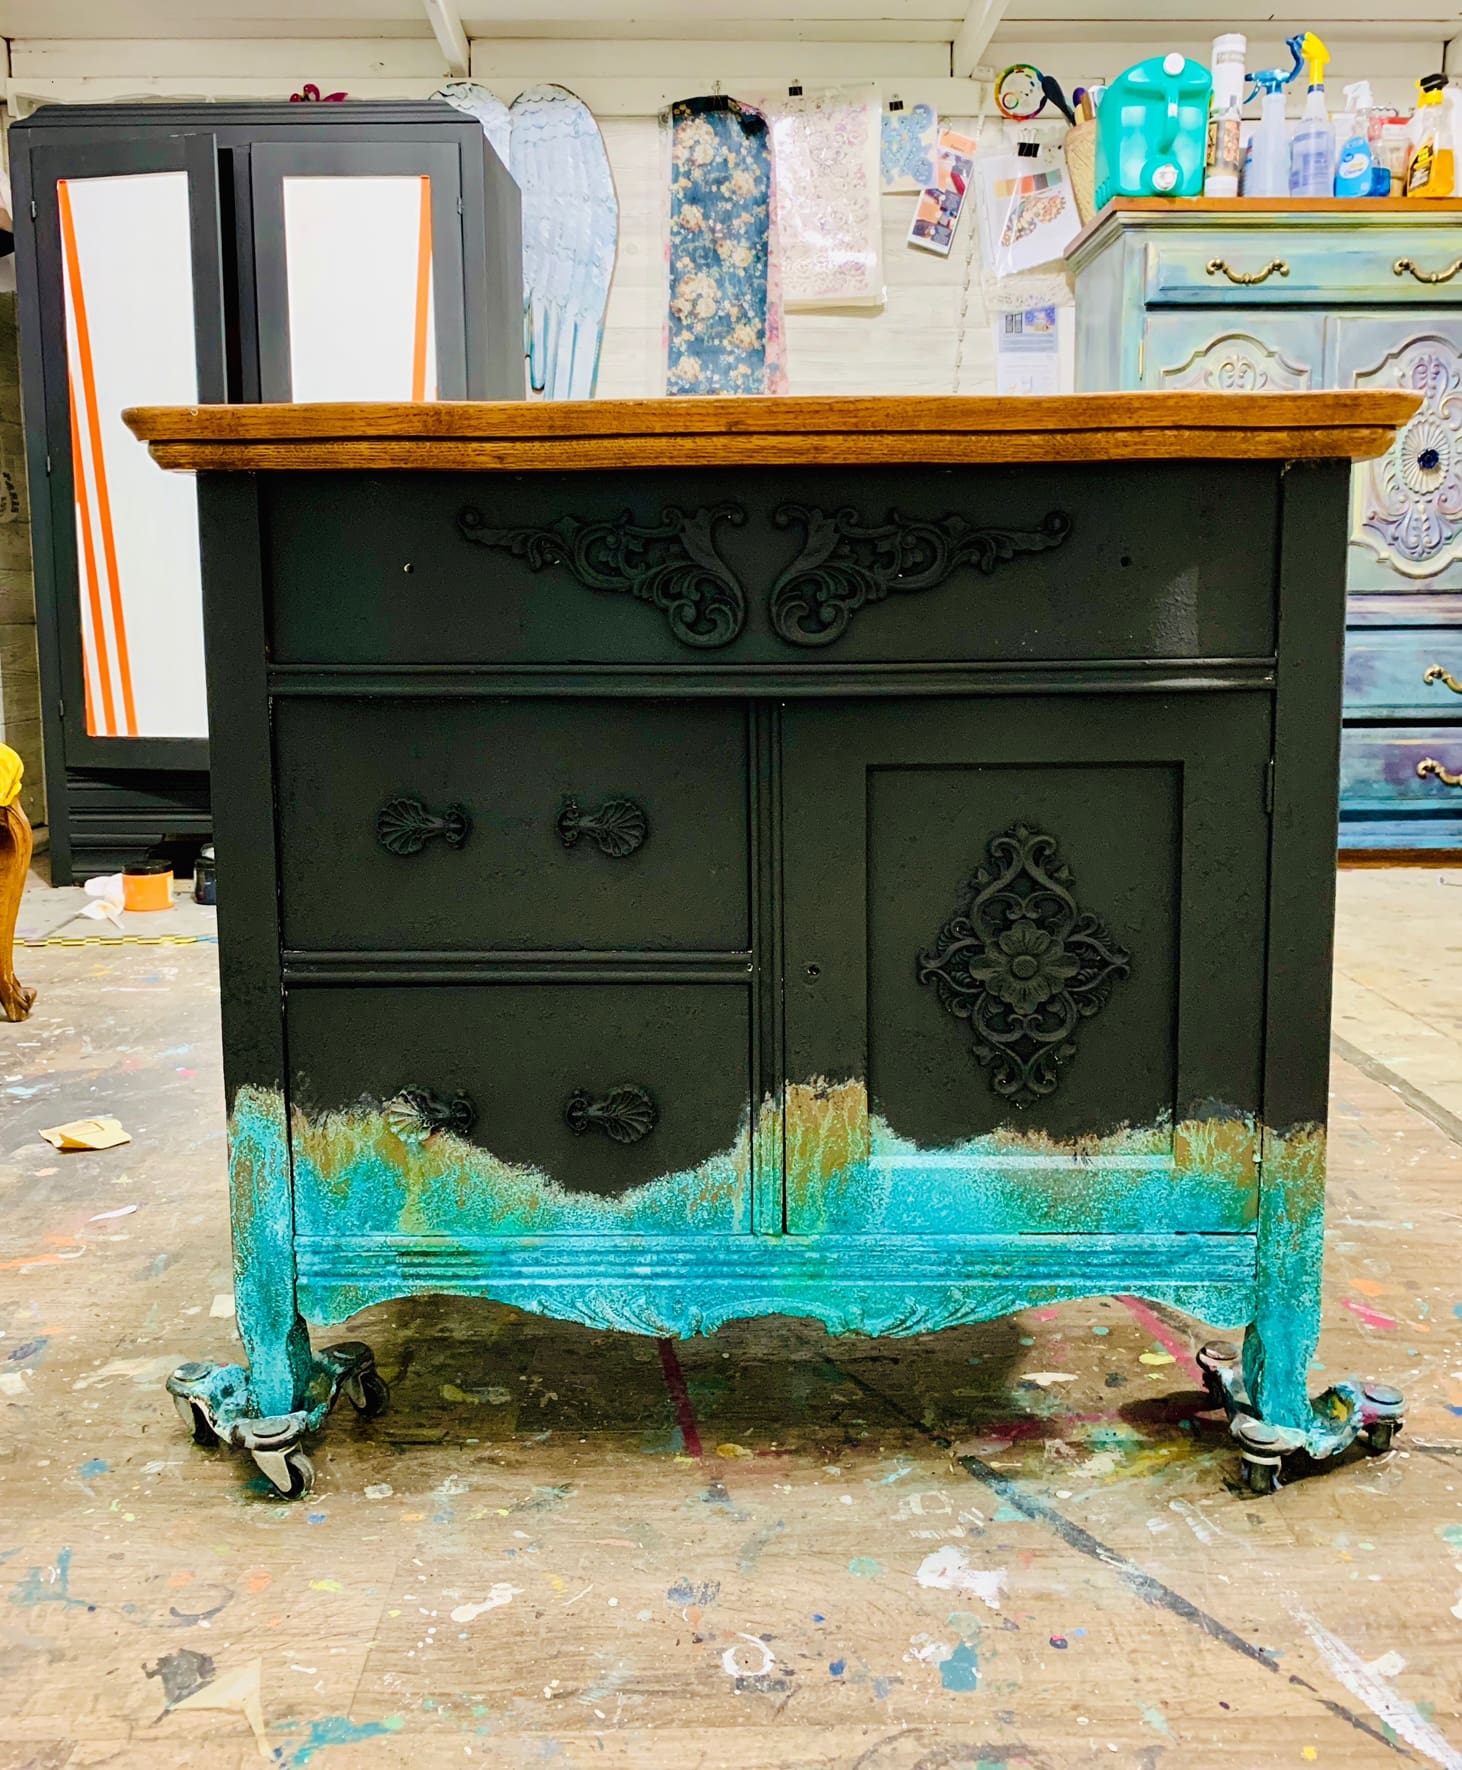 How to dry brush paint furniture